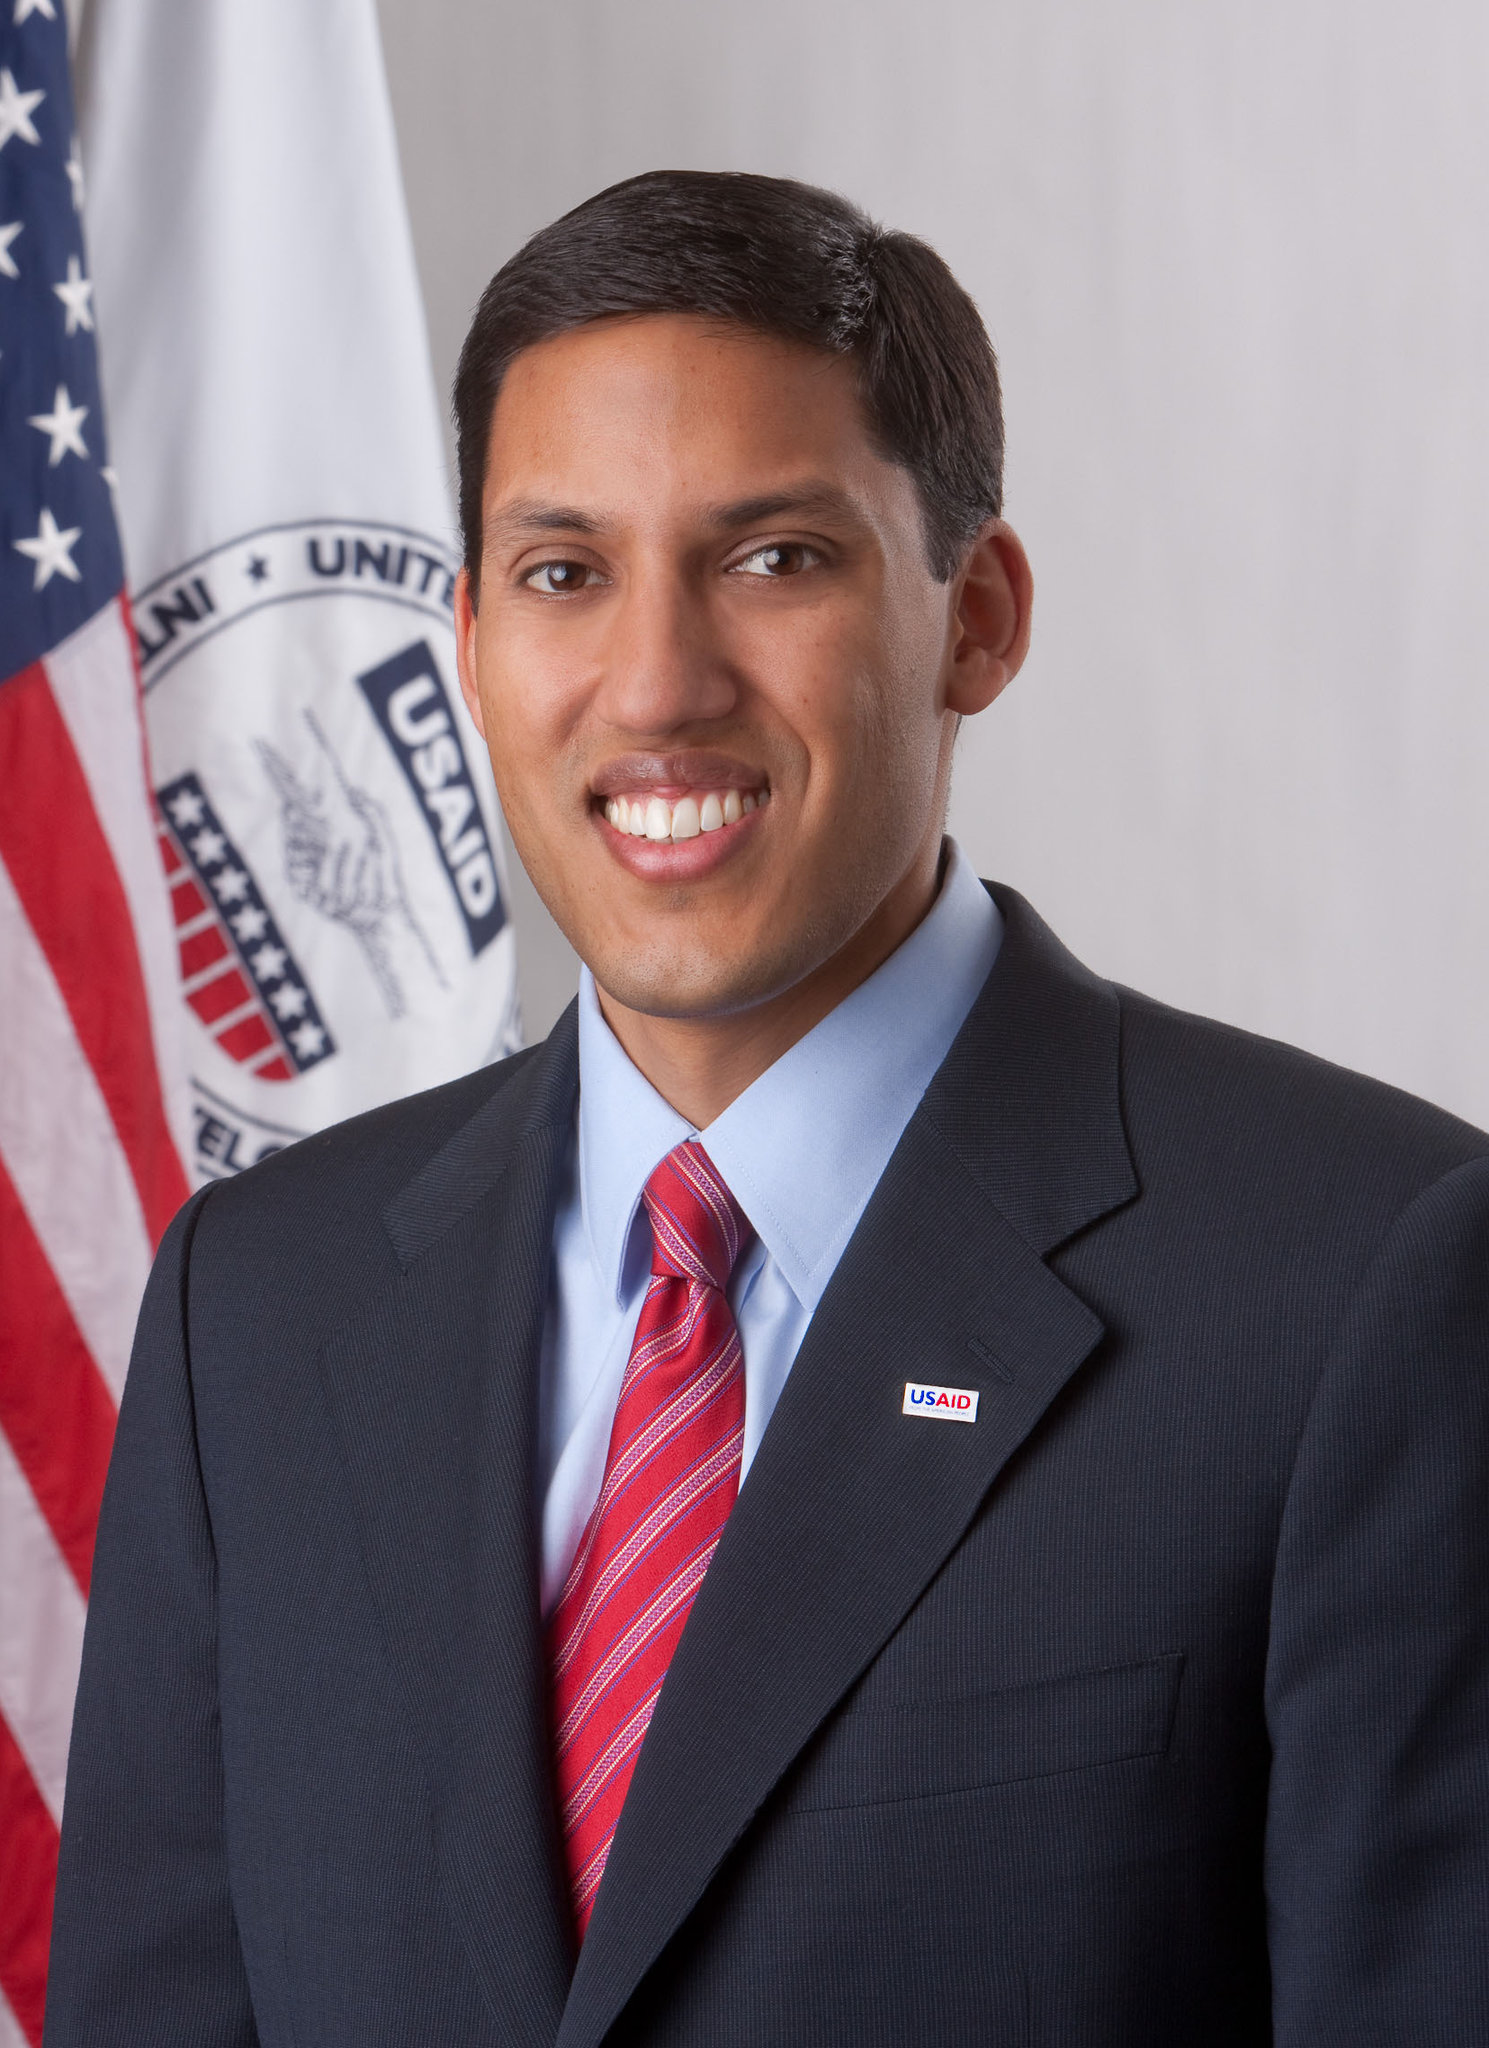 Dr Rajiv Shah appointed to the Board of Directors of Federal Reserve Bank of New York